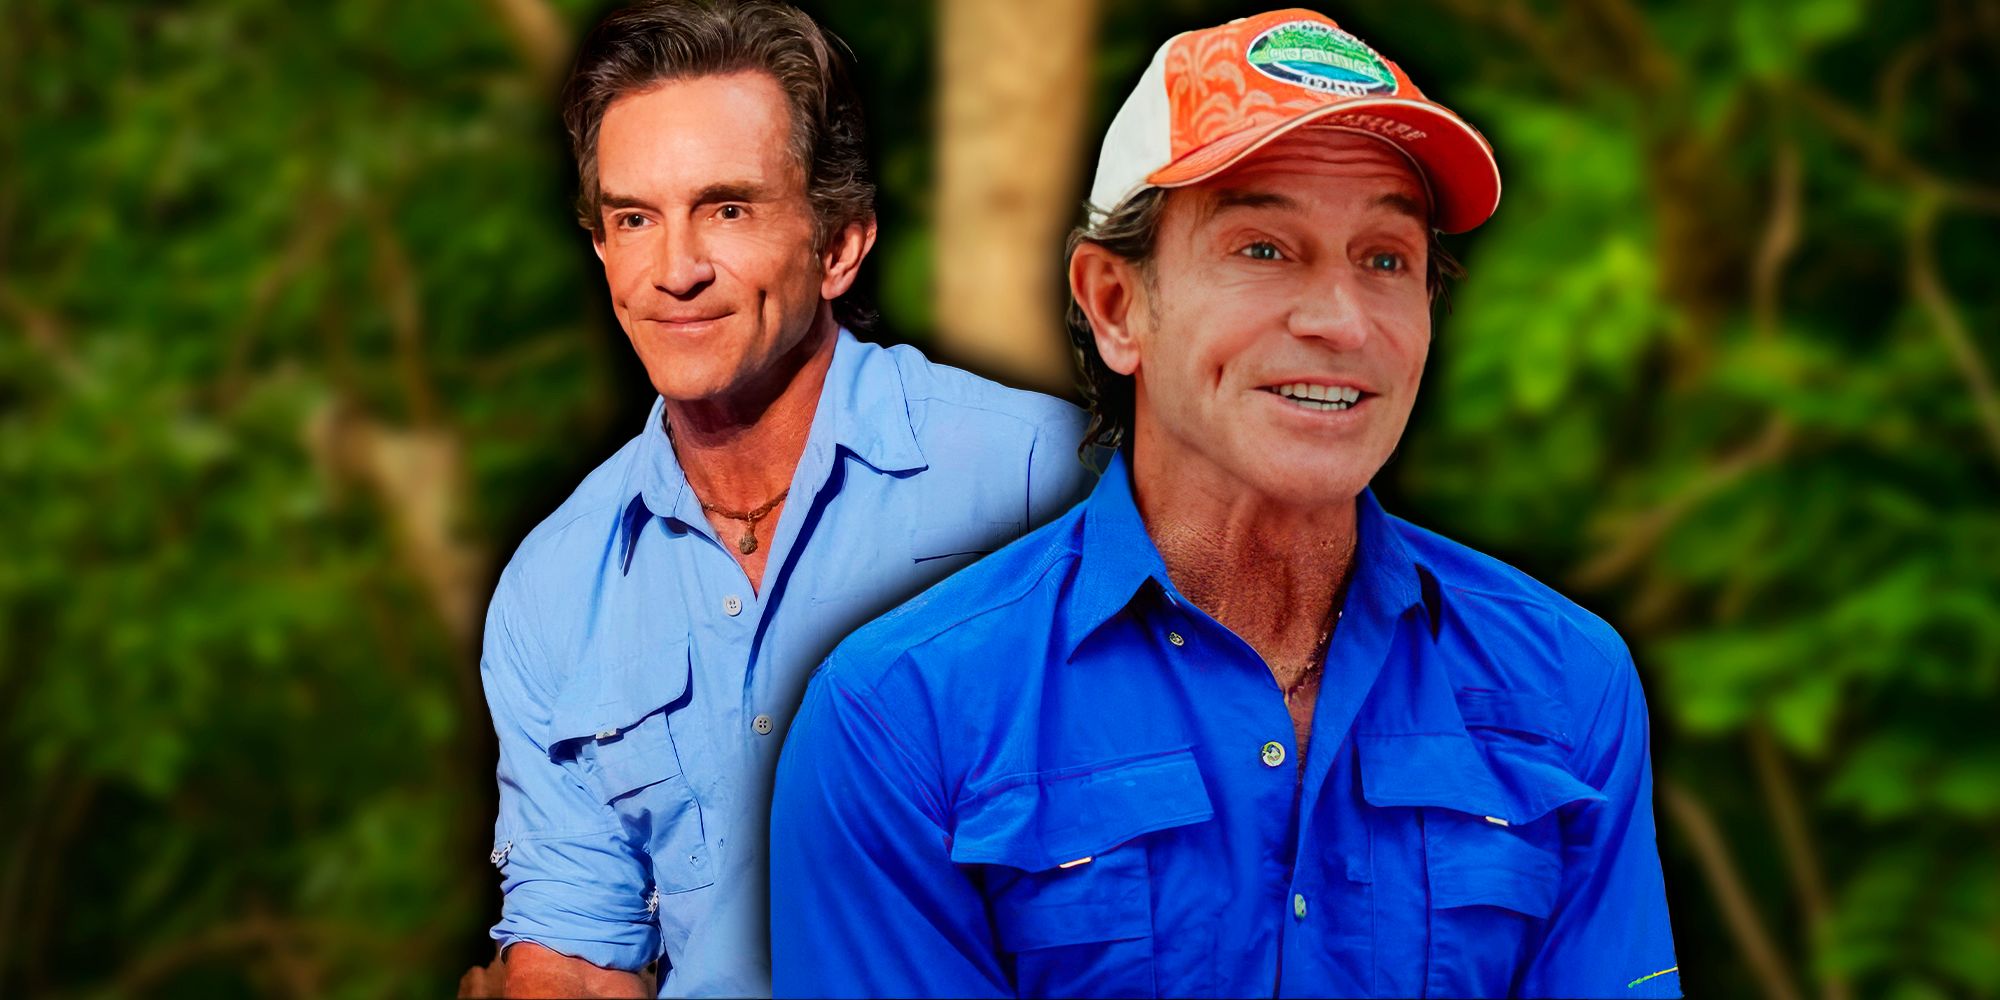 Jeff Probst Survivor montage jeff in pale blue and bright blue shirts smiling in both shots